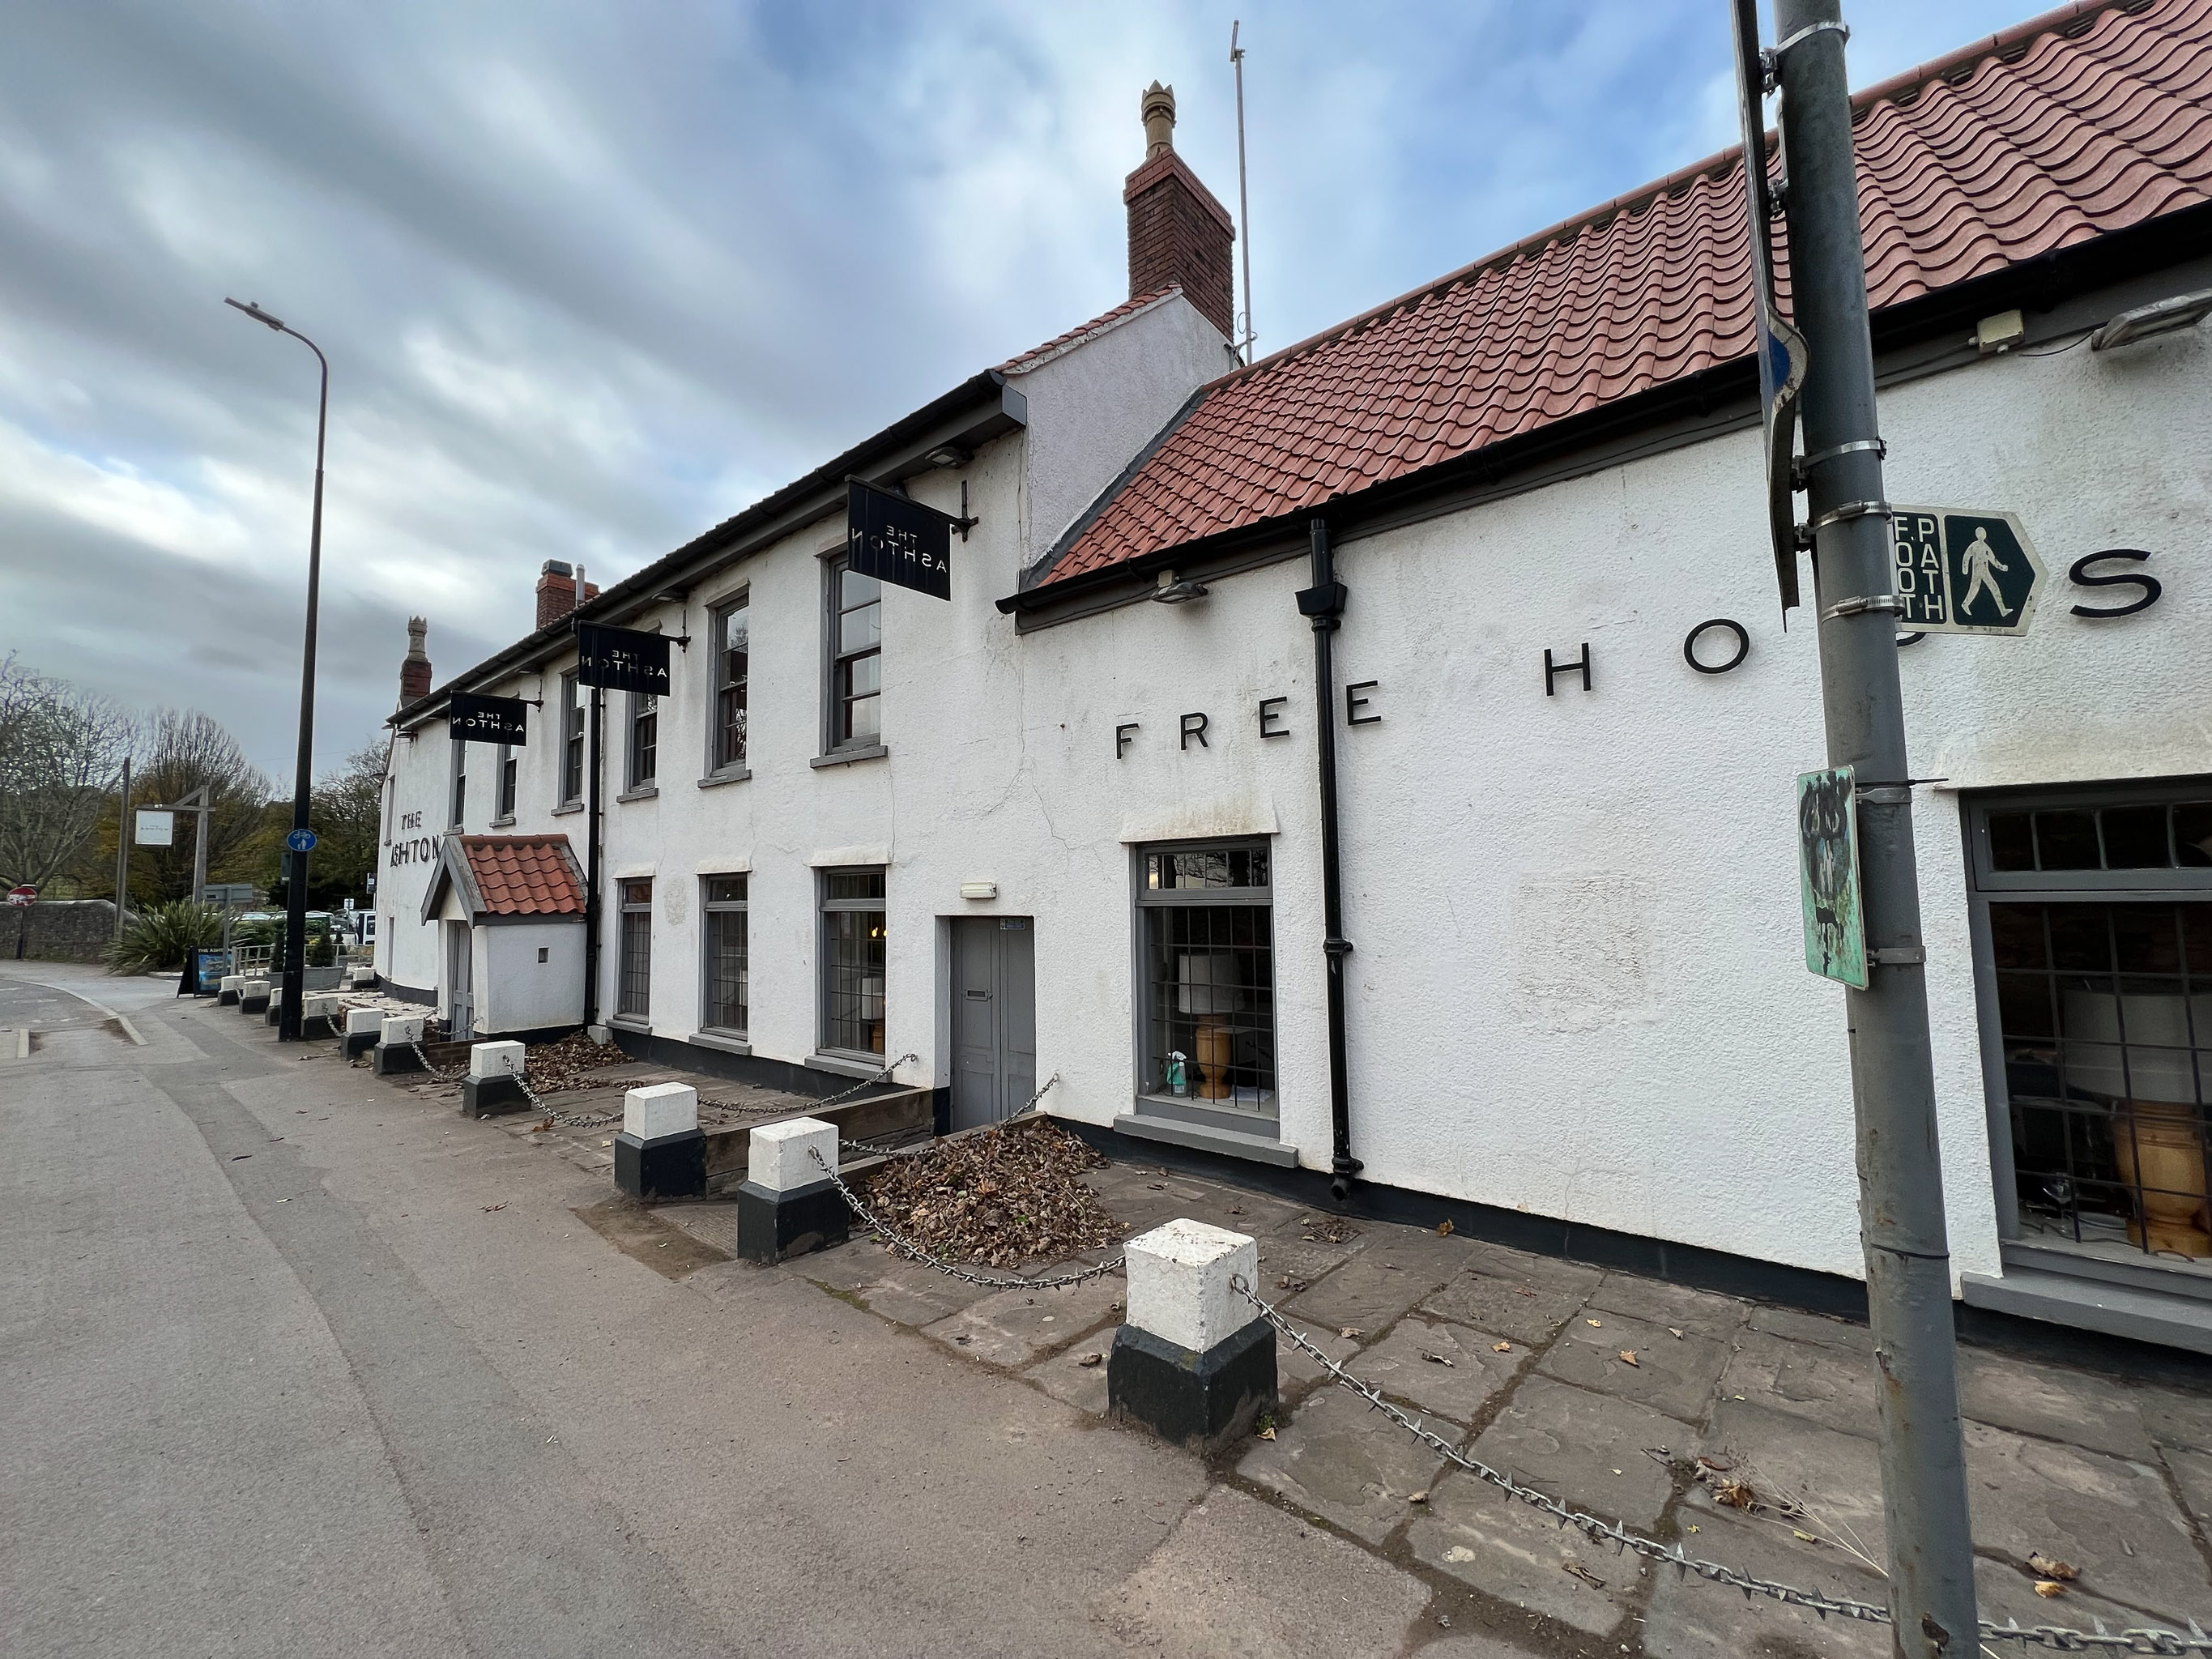 The Ashton
I'm not sure I've ever walked or even driven past the Ashton before, and it's only a mile away from me—in fact, my mile radius line divides it roug...